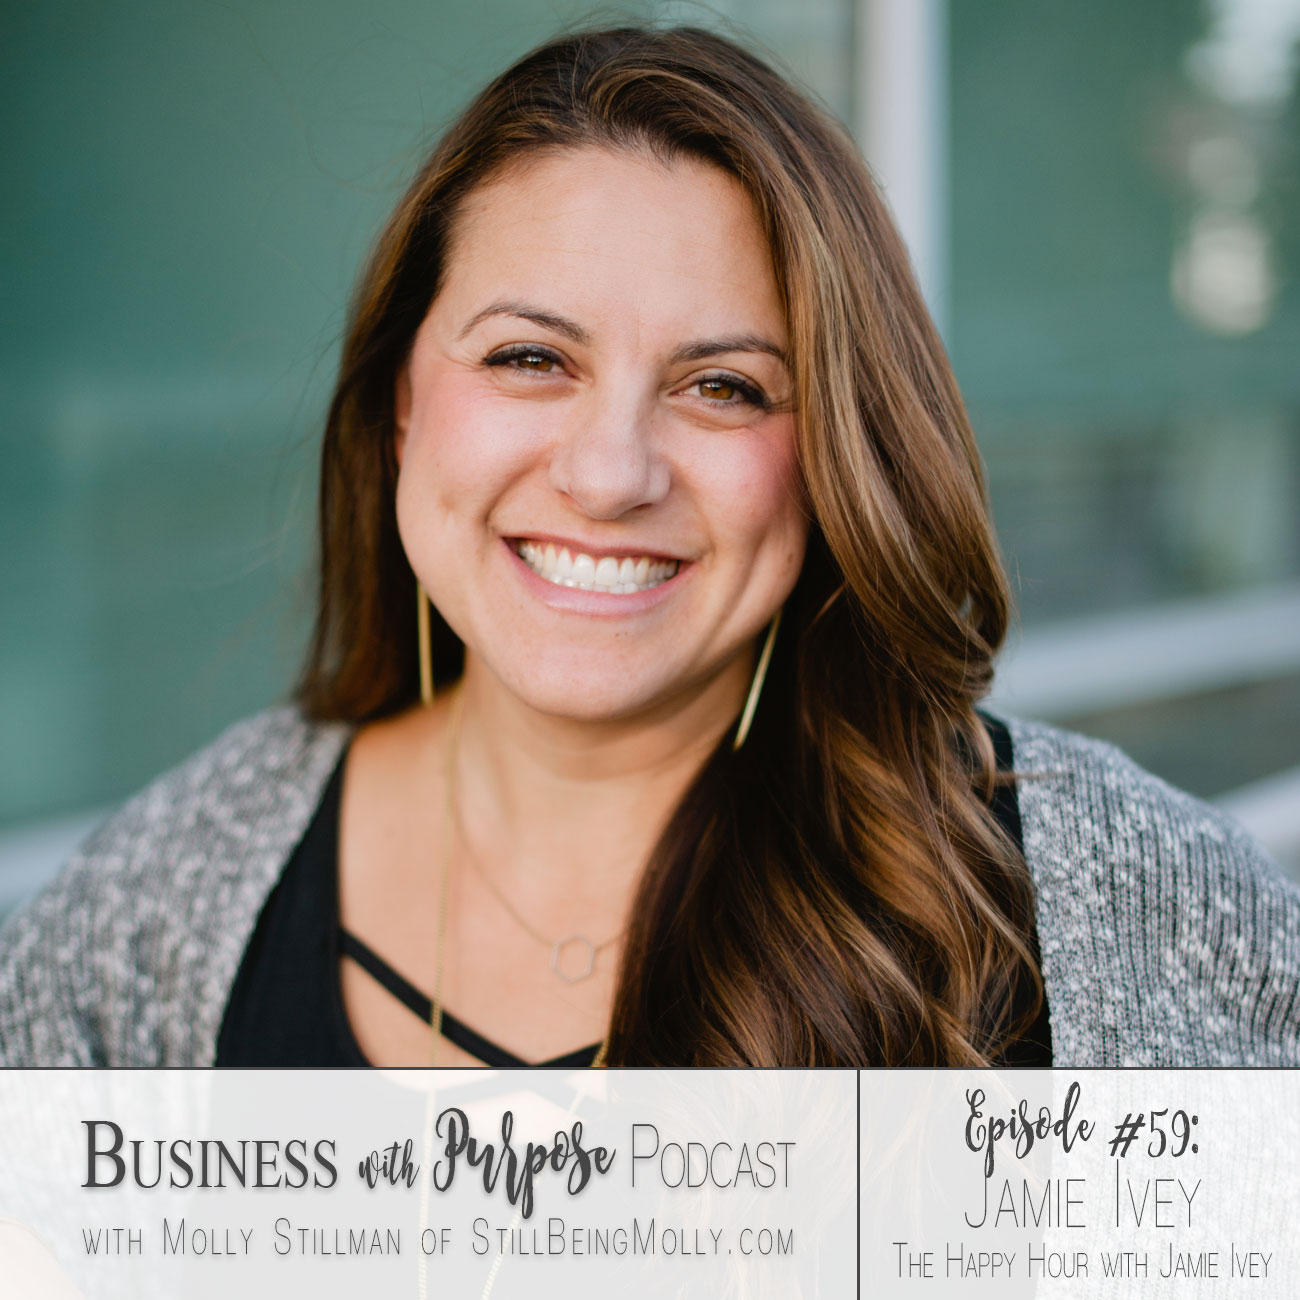 Business with Purpose Podcast EP 59: Jamie Ivey, The Happy Hour with Jamie Ivey Podcast by popular North Carolina blogger Still Being Molly